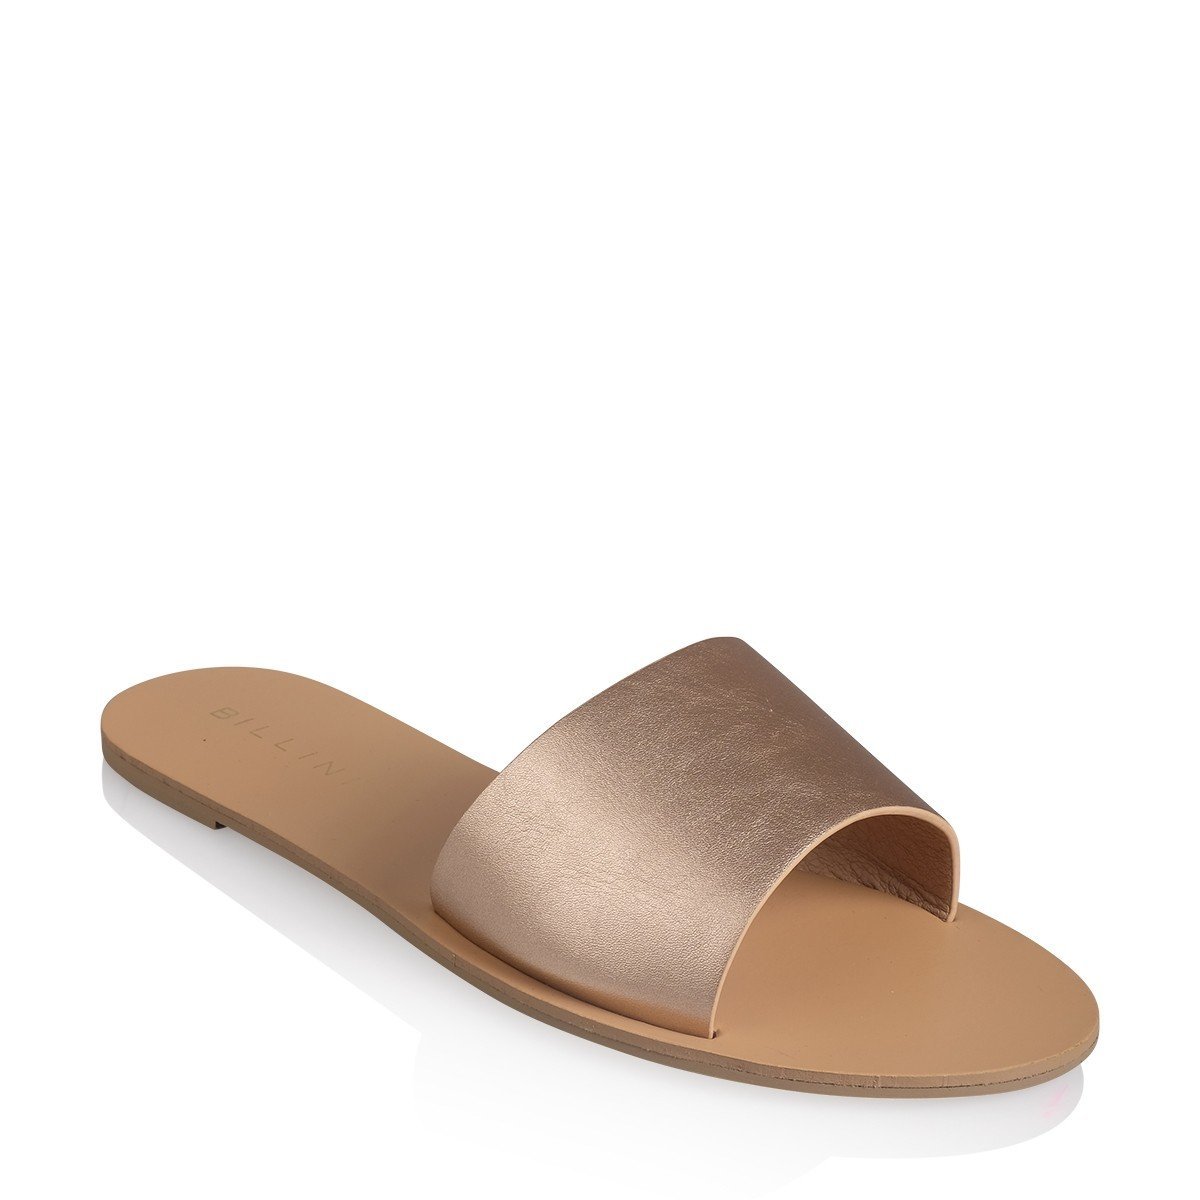 Billini Crete Slide in Soft Rose Gold Size 8 or 10 Only - Hey Sara